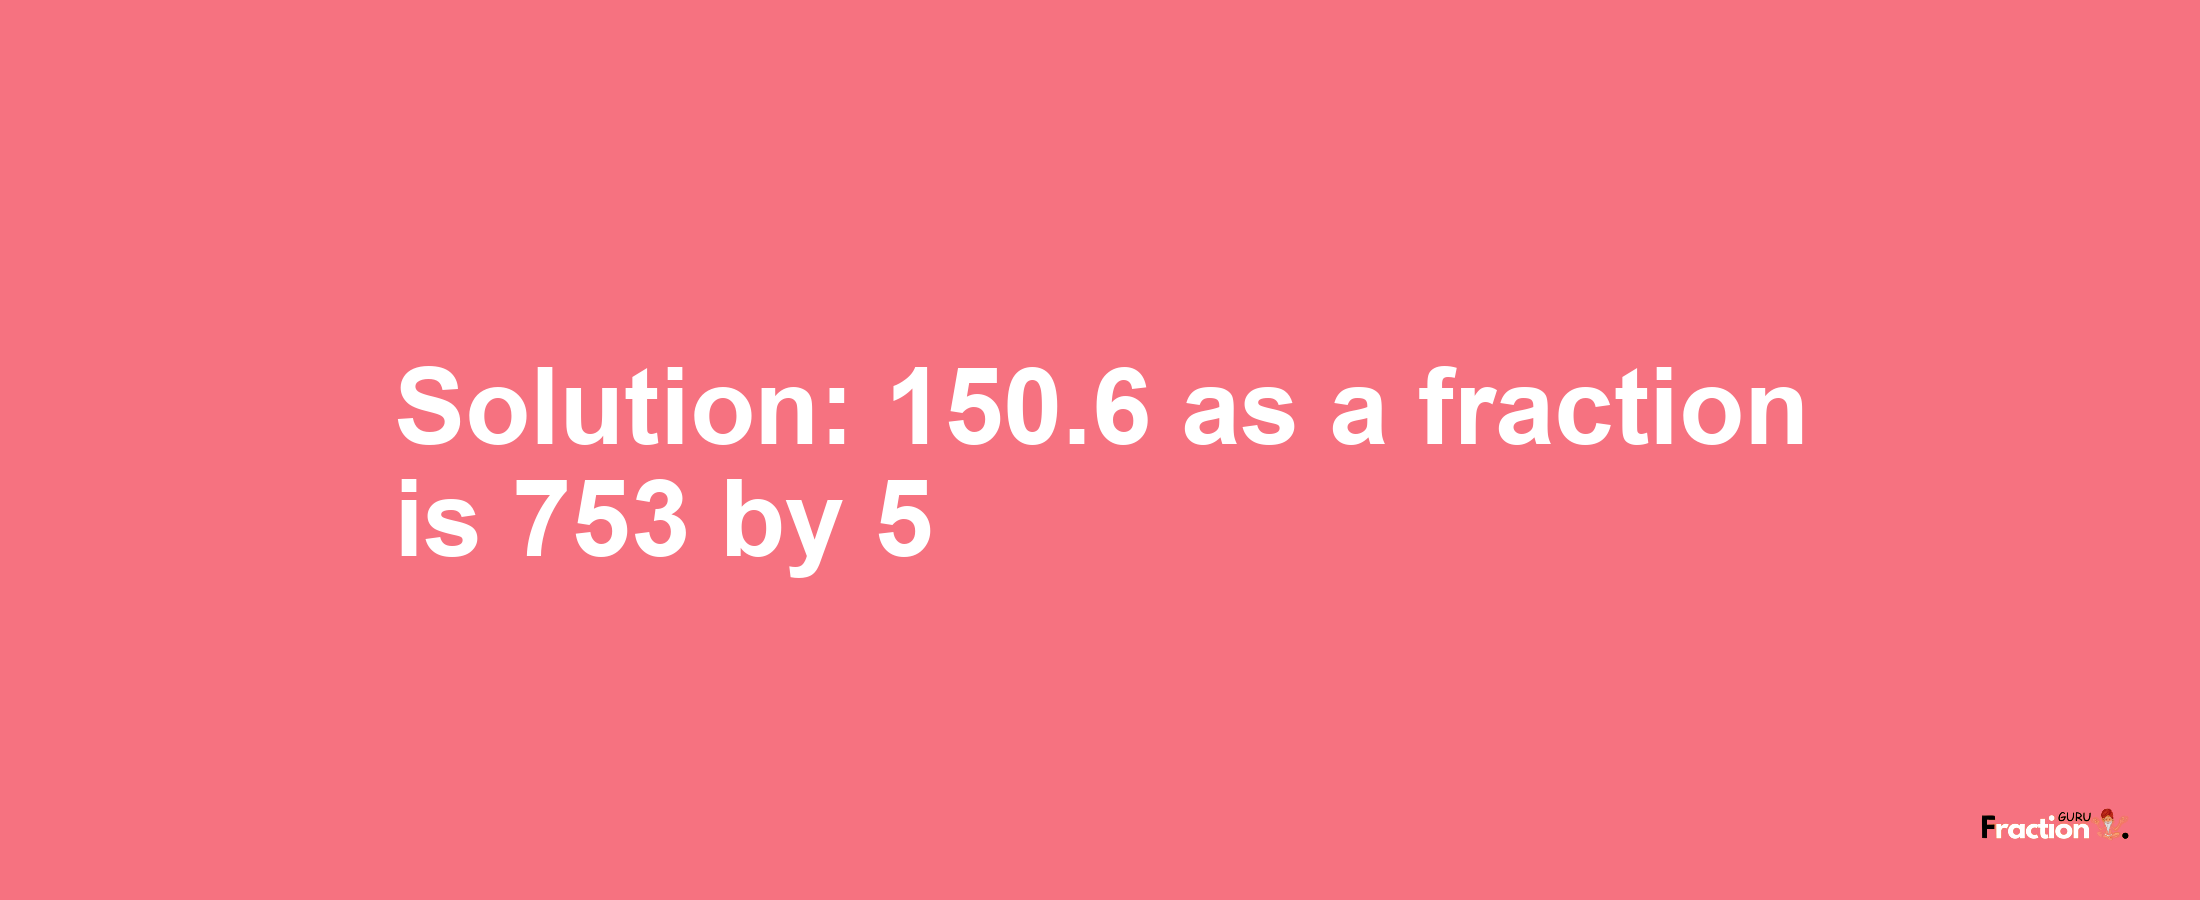 Solution:150.6 as a fraction is 753/5